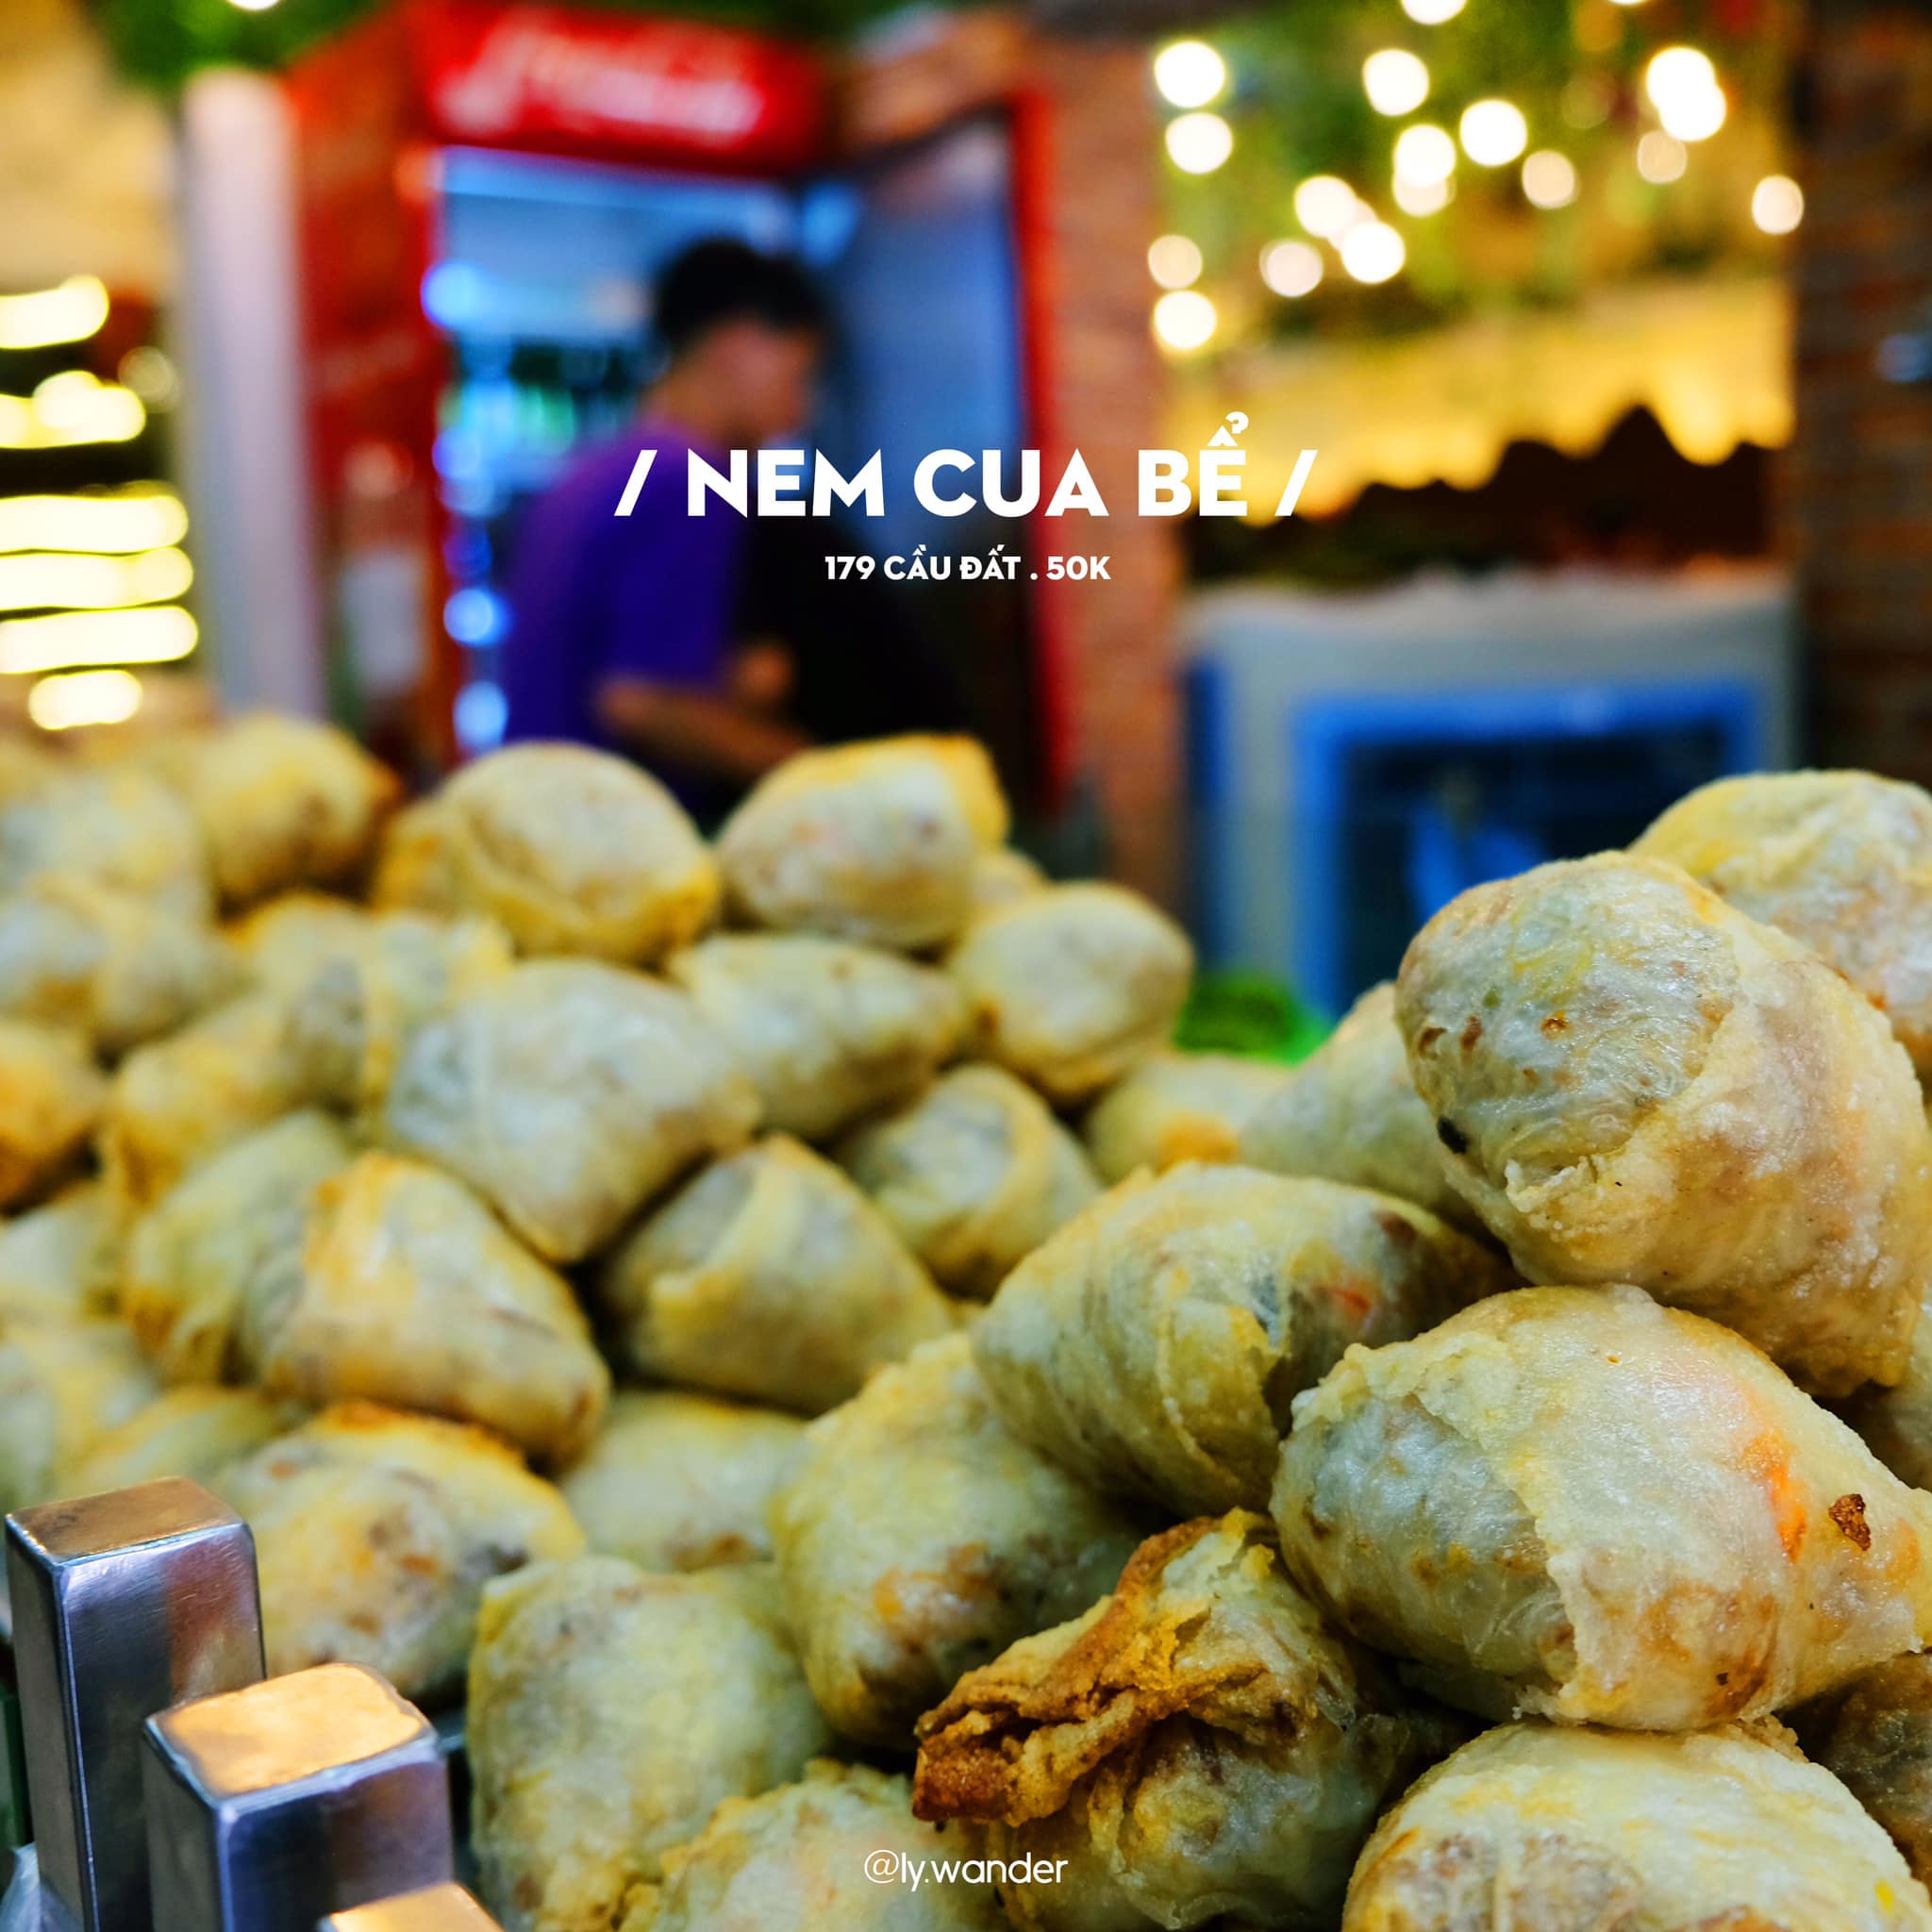 Nem cua be (deep fried crab spring rolls), one of the most famous delicacies in Hai Phong, is traditionally wrapped into a square about the size of a palm. Photo: Ly Nguyen / Tuoi Tre